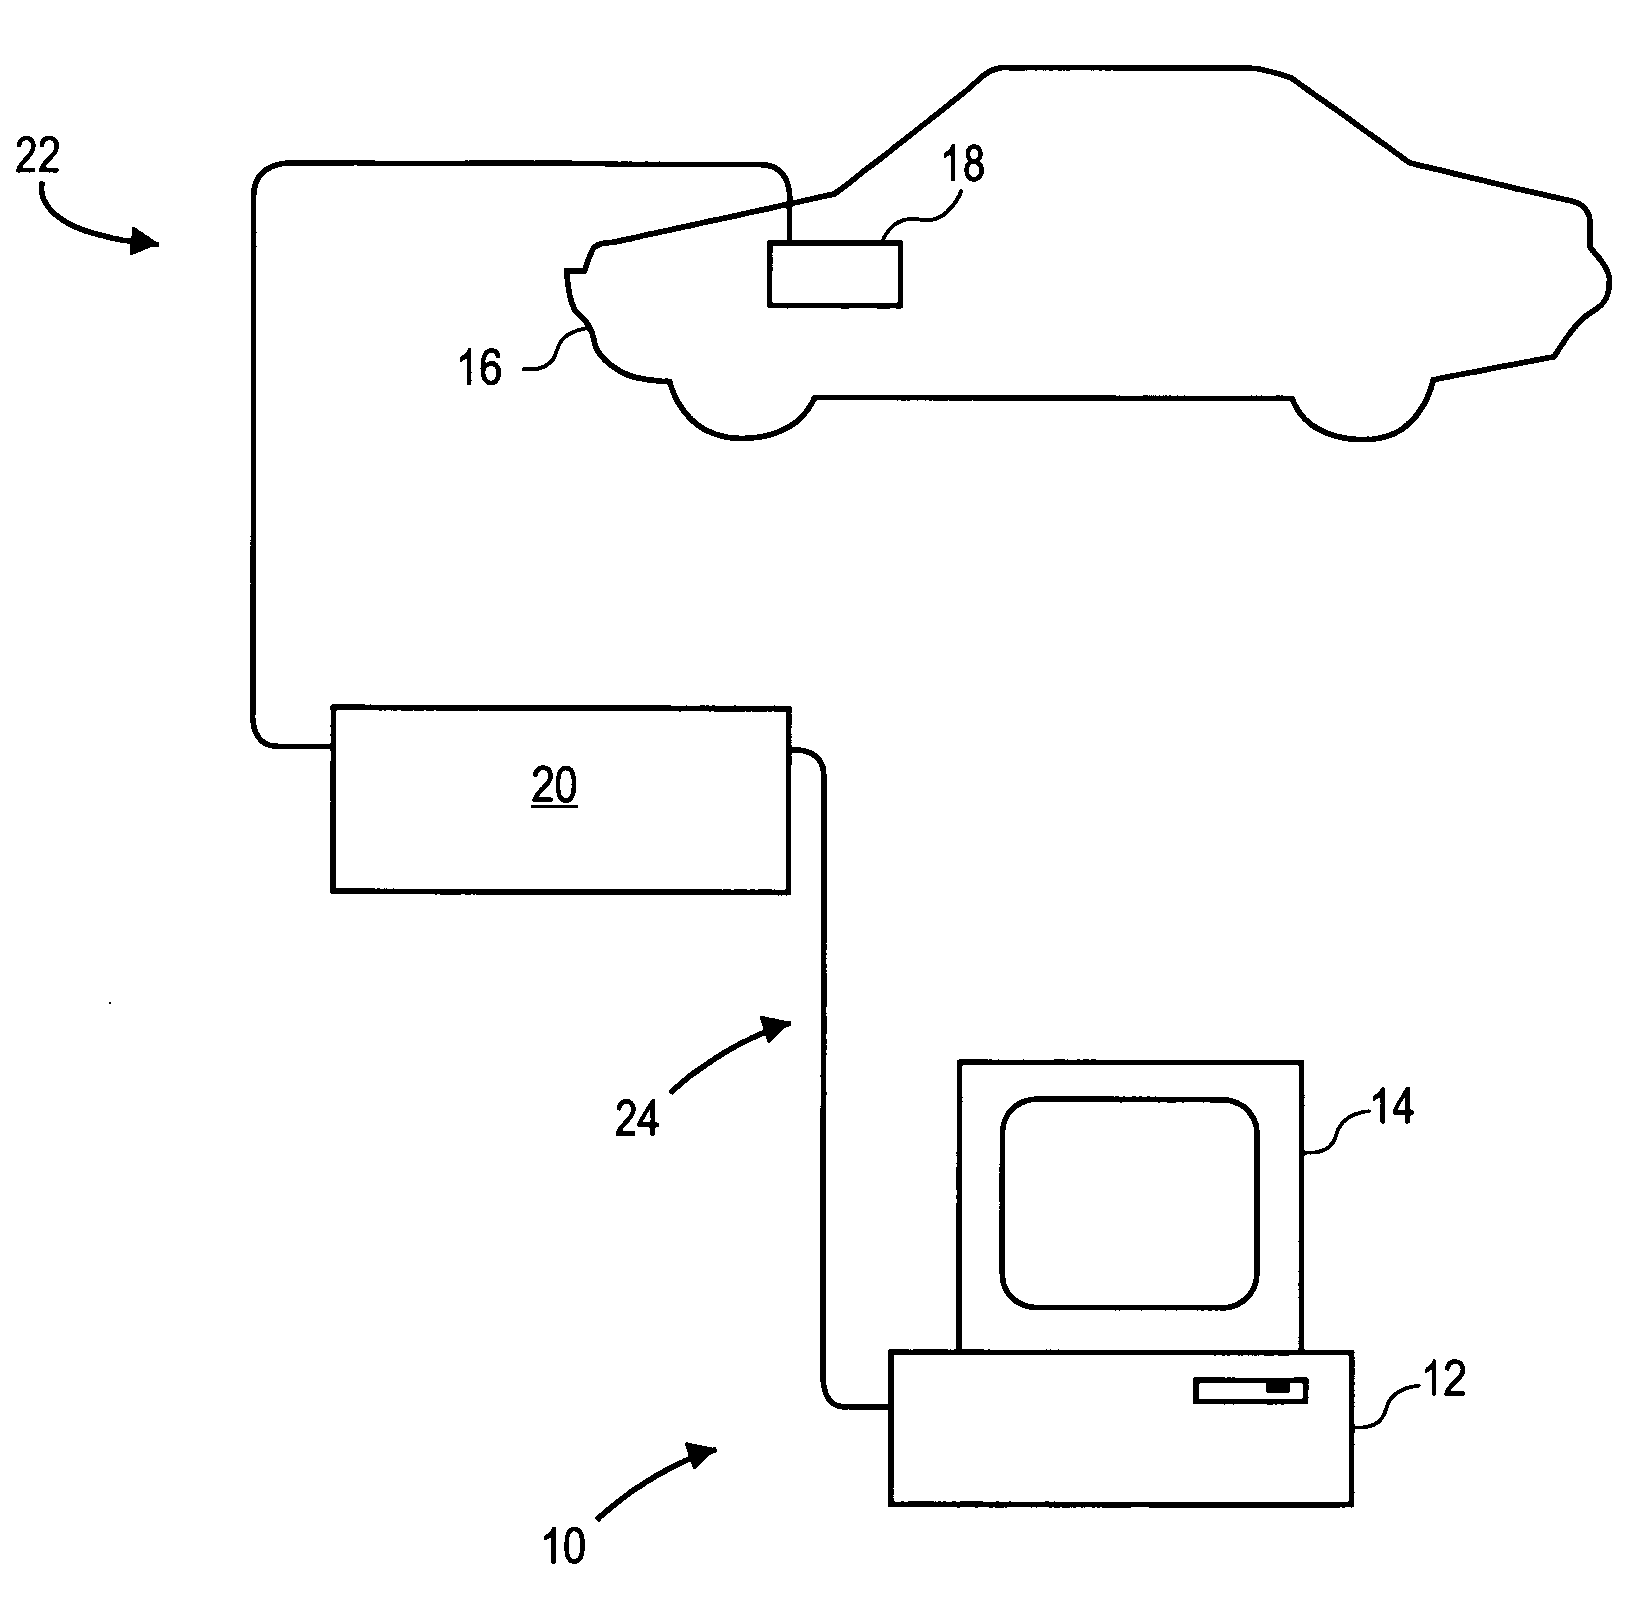 Vehicle state tracking method and apparatus for diagnostic testing